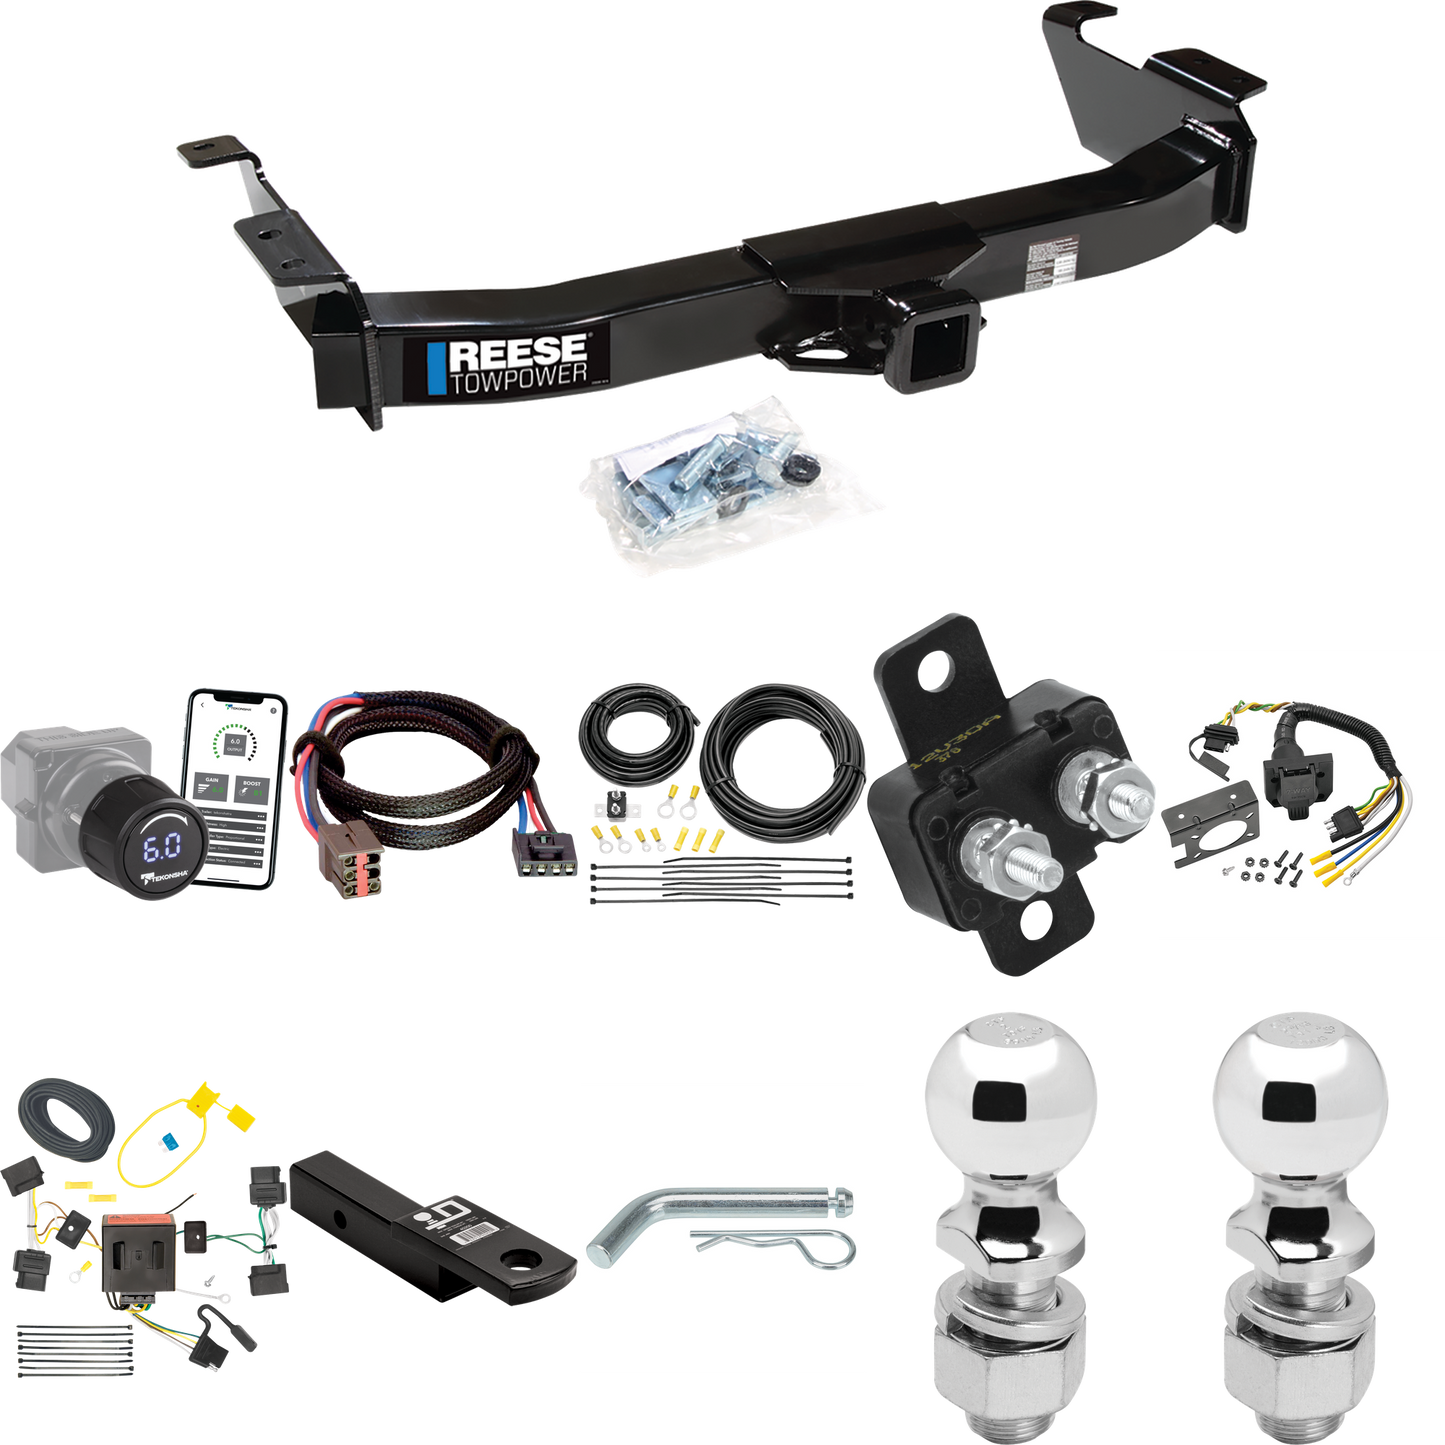 Fits 2008-2008 Ford E-150 Econoline Trailer Hitch Tow PKG w/ Tekonsha Prodigy iD Bluetooth Wireless Brake Control + Plug & Play BC Adapter + 7-Way RV Wiring + 2" & 2-5/16" Ball & Drop Mount By Reese Towpower